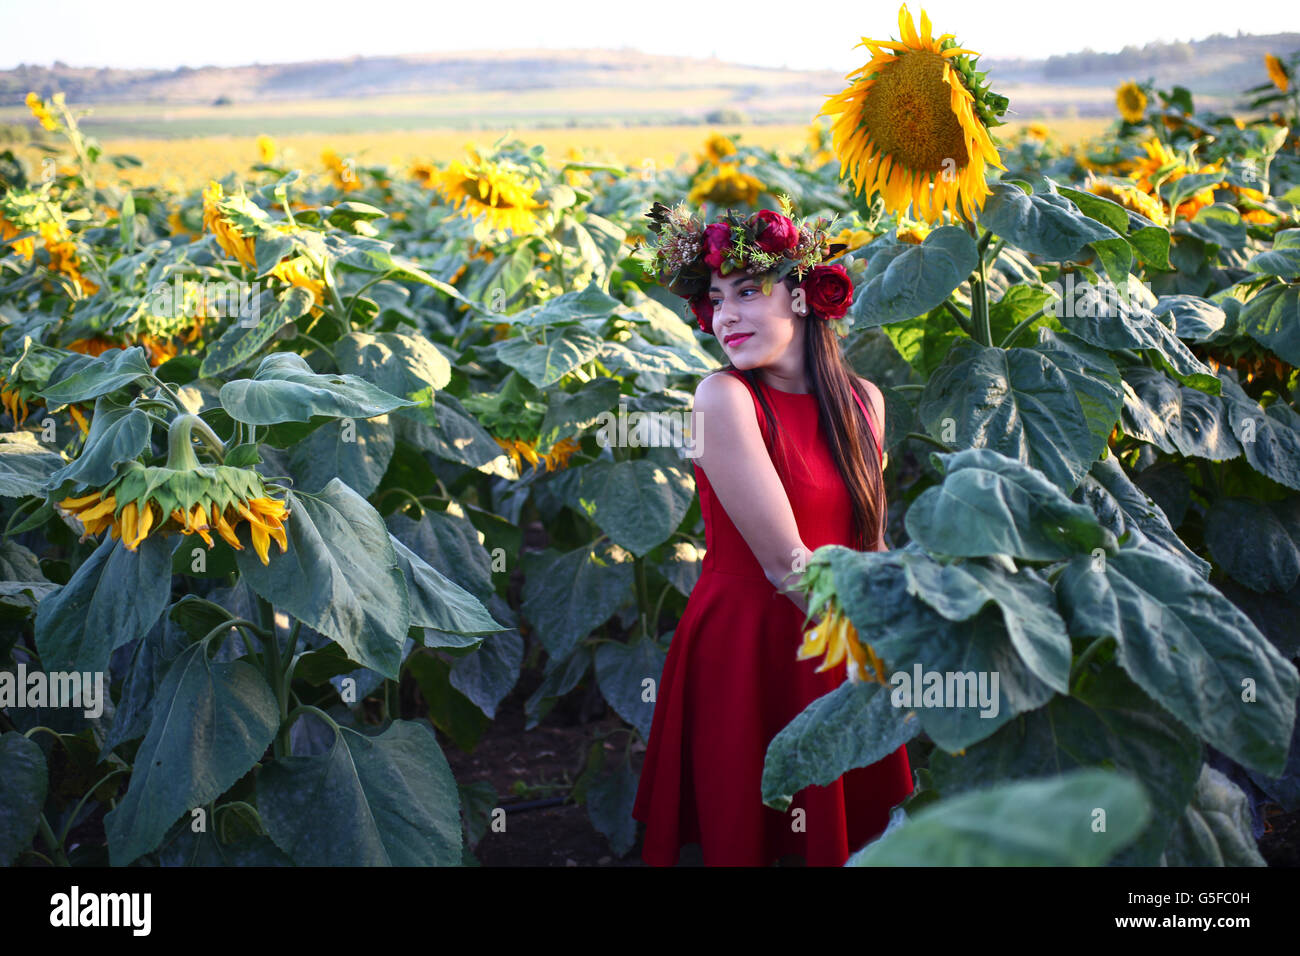 Preteen with wreath in a field of sunflowers Stock Photo